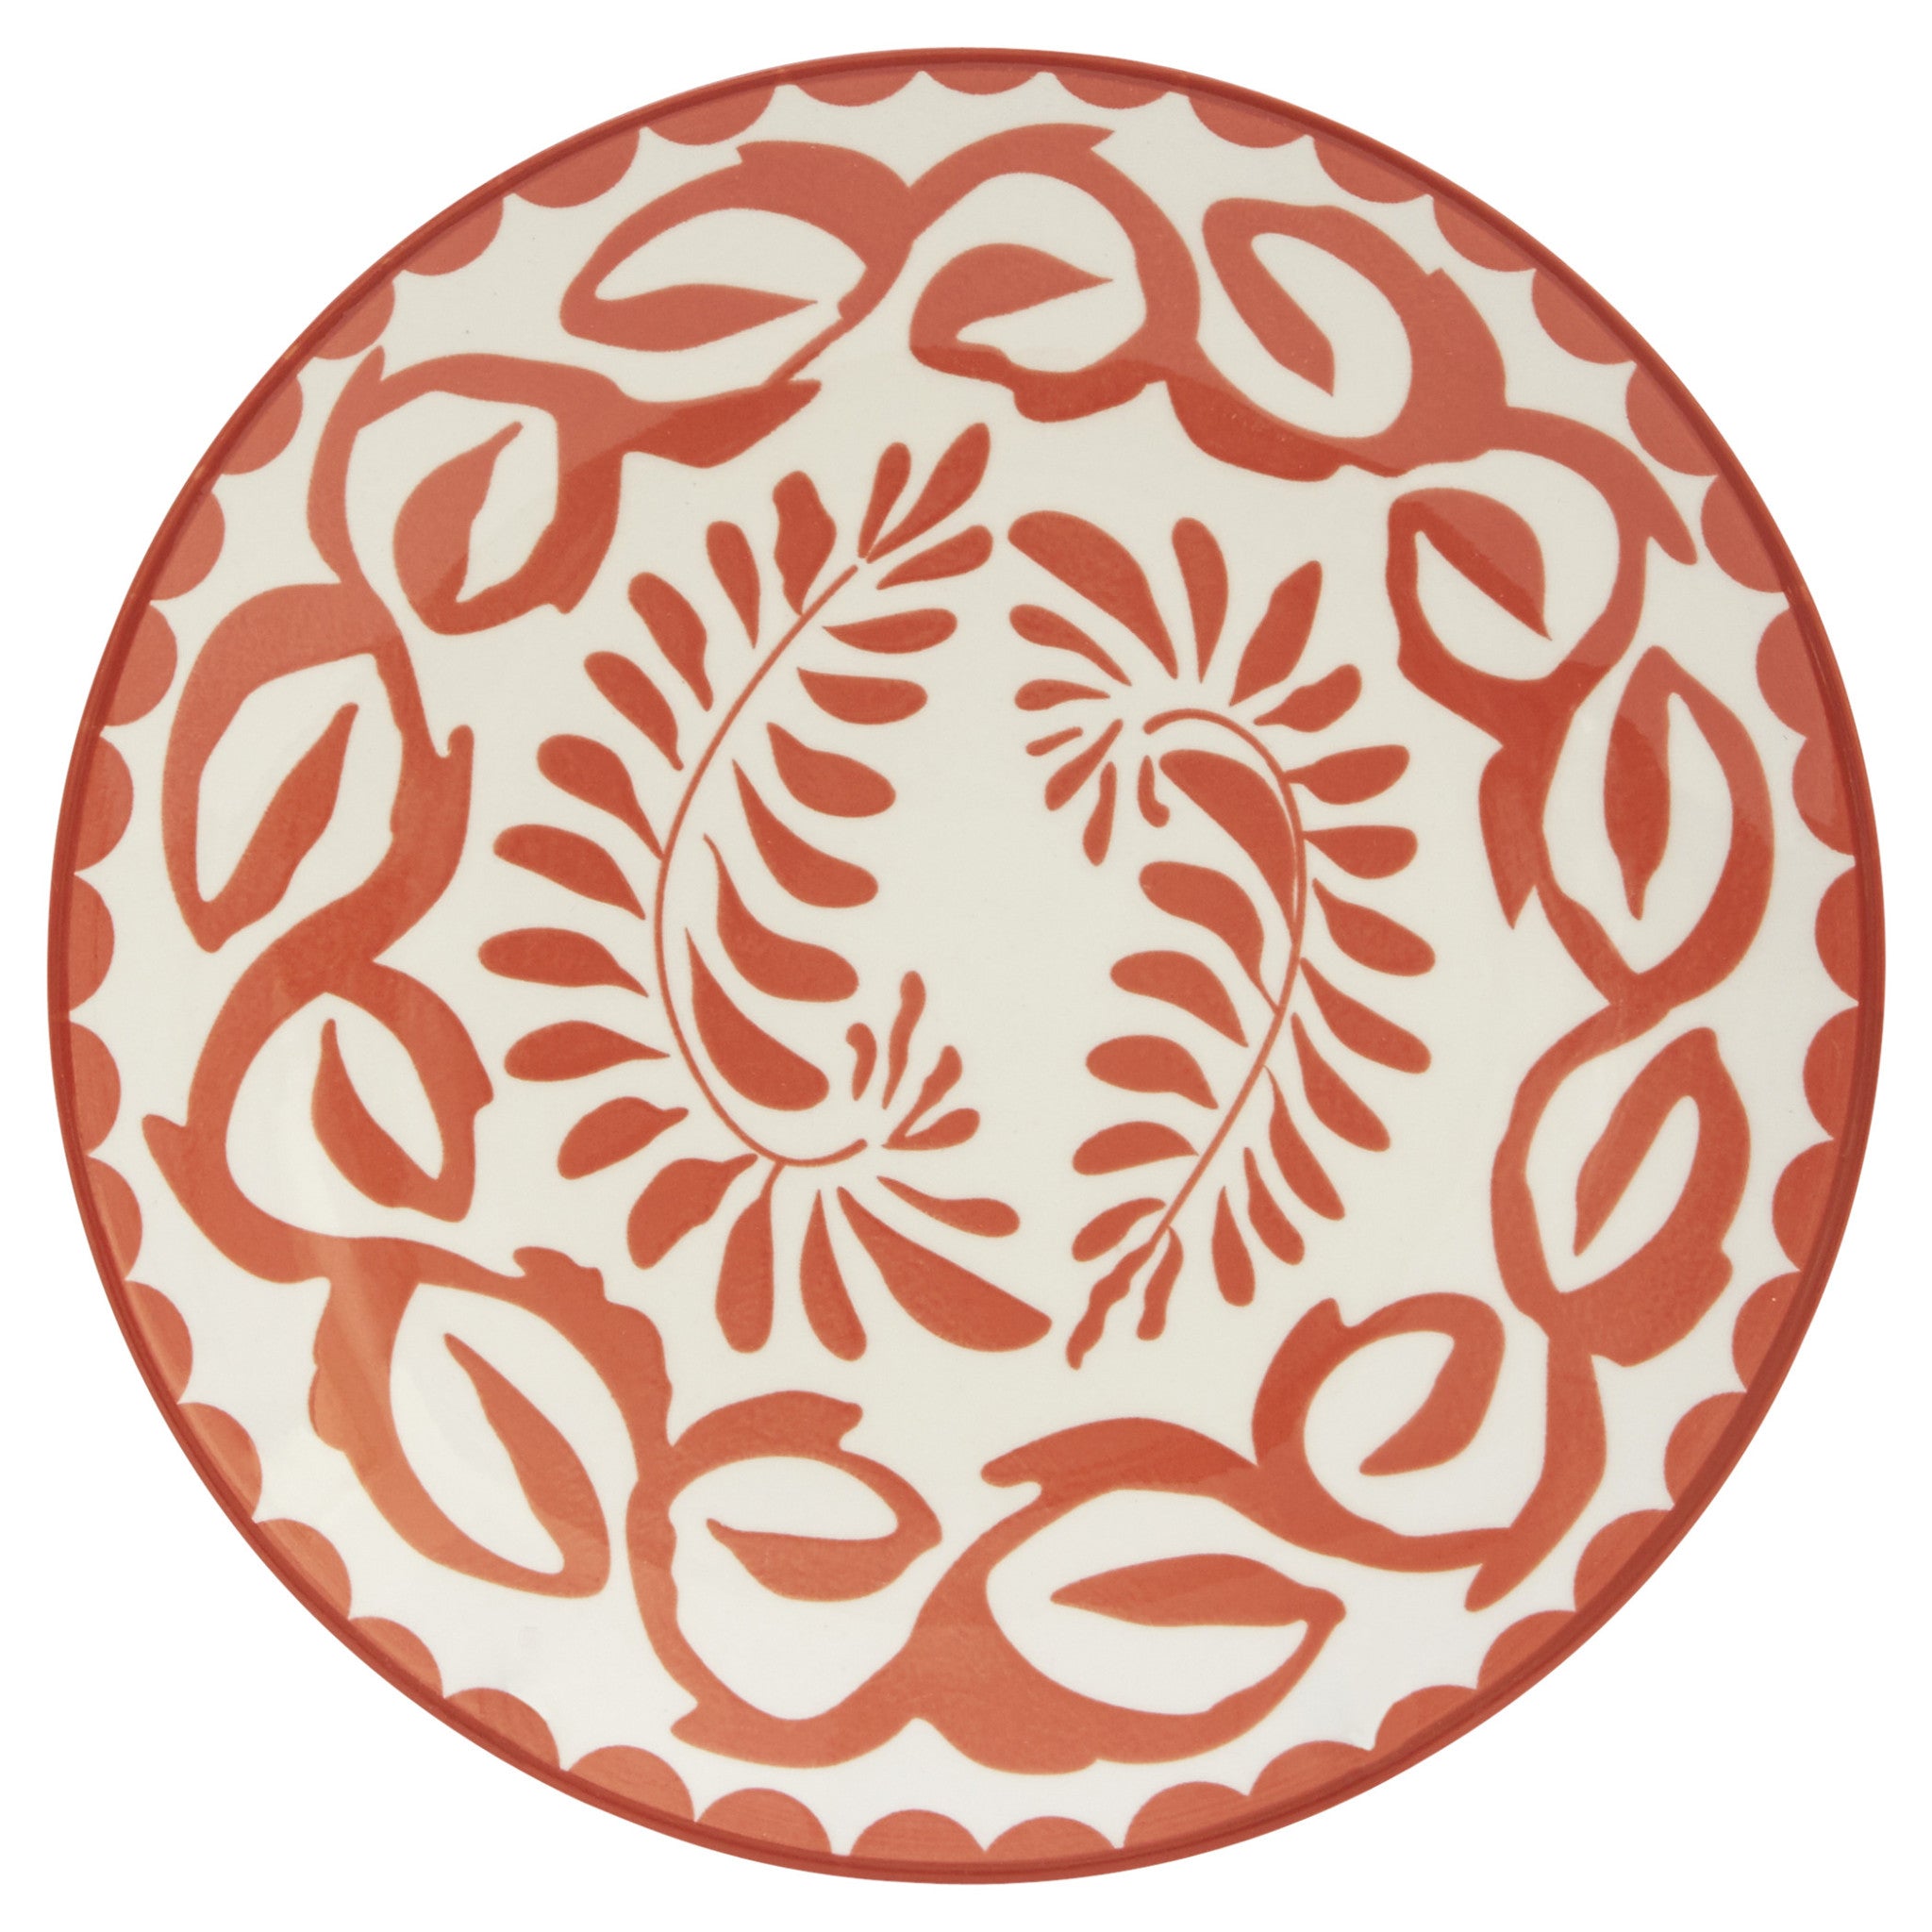 Orange and White Sixteen Piece Round Leaves Ceramic Service For Four Dinnerware Set - Tuesday Morning-Dinnerware